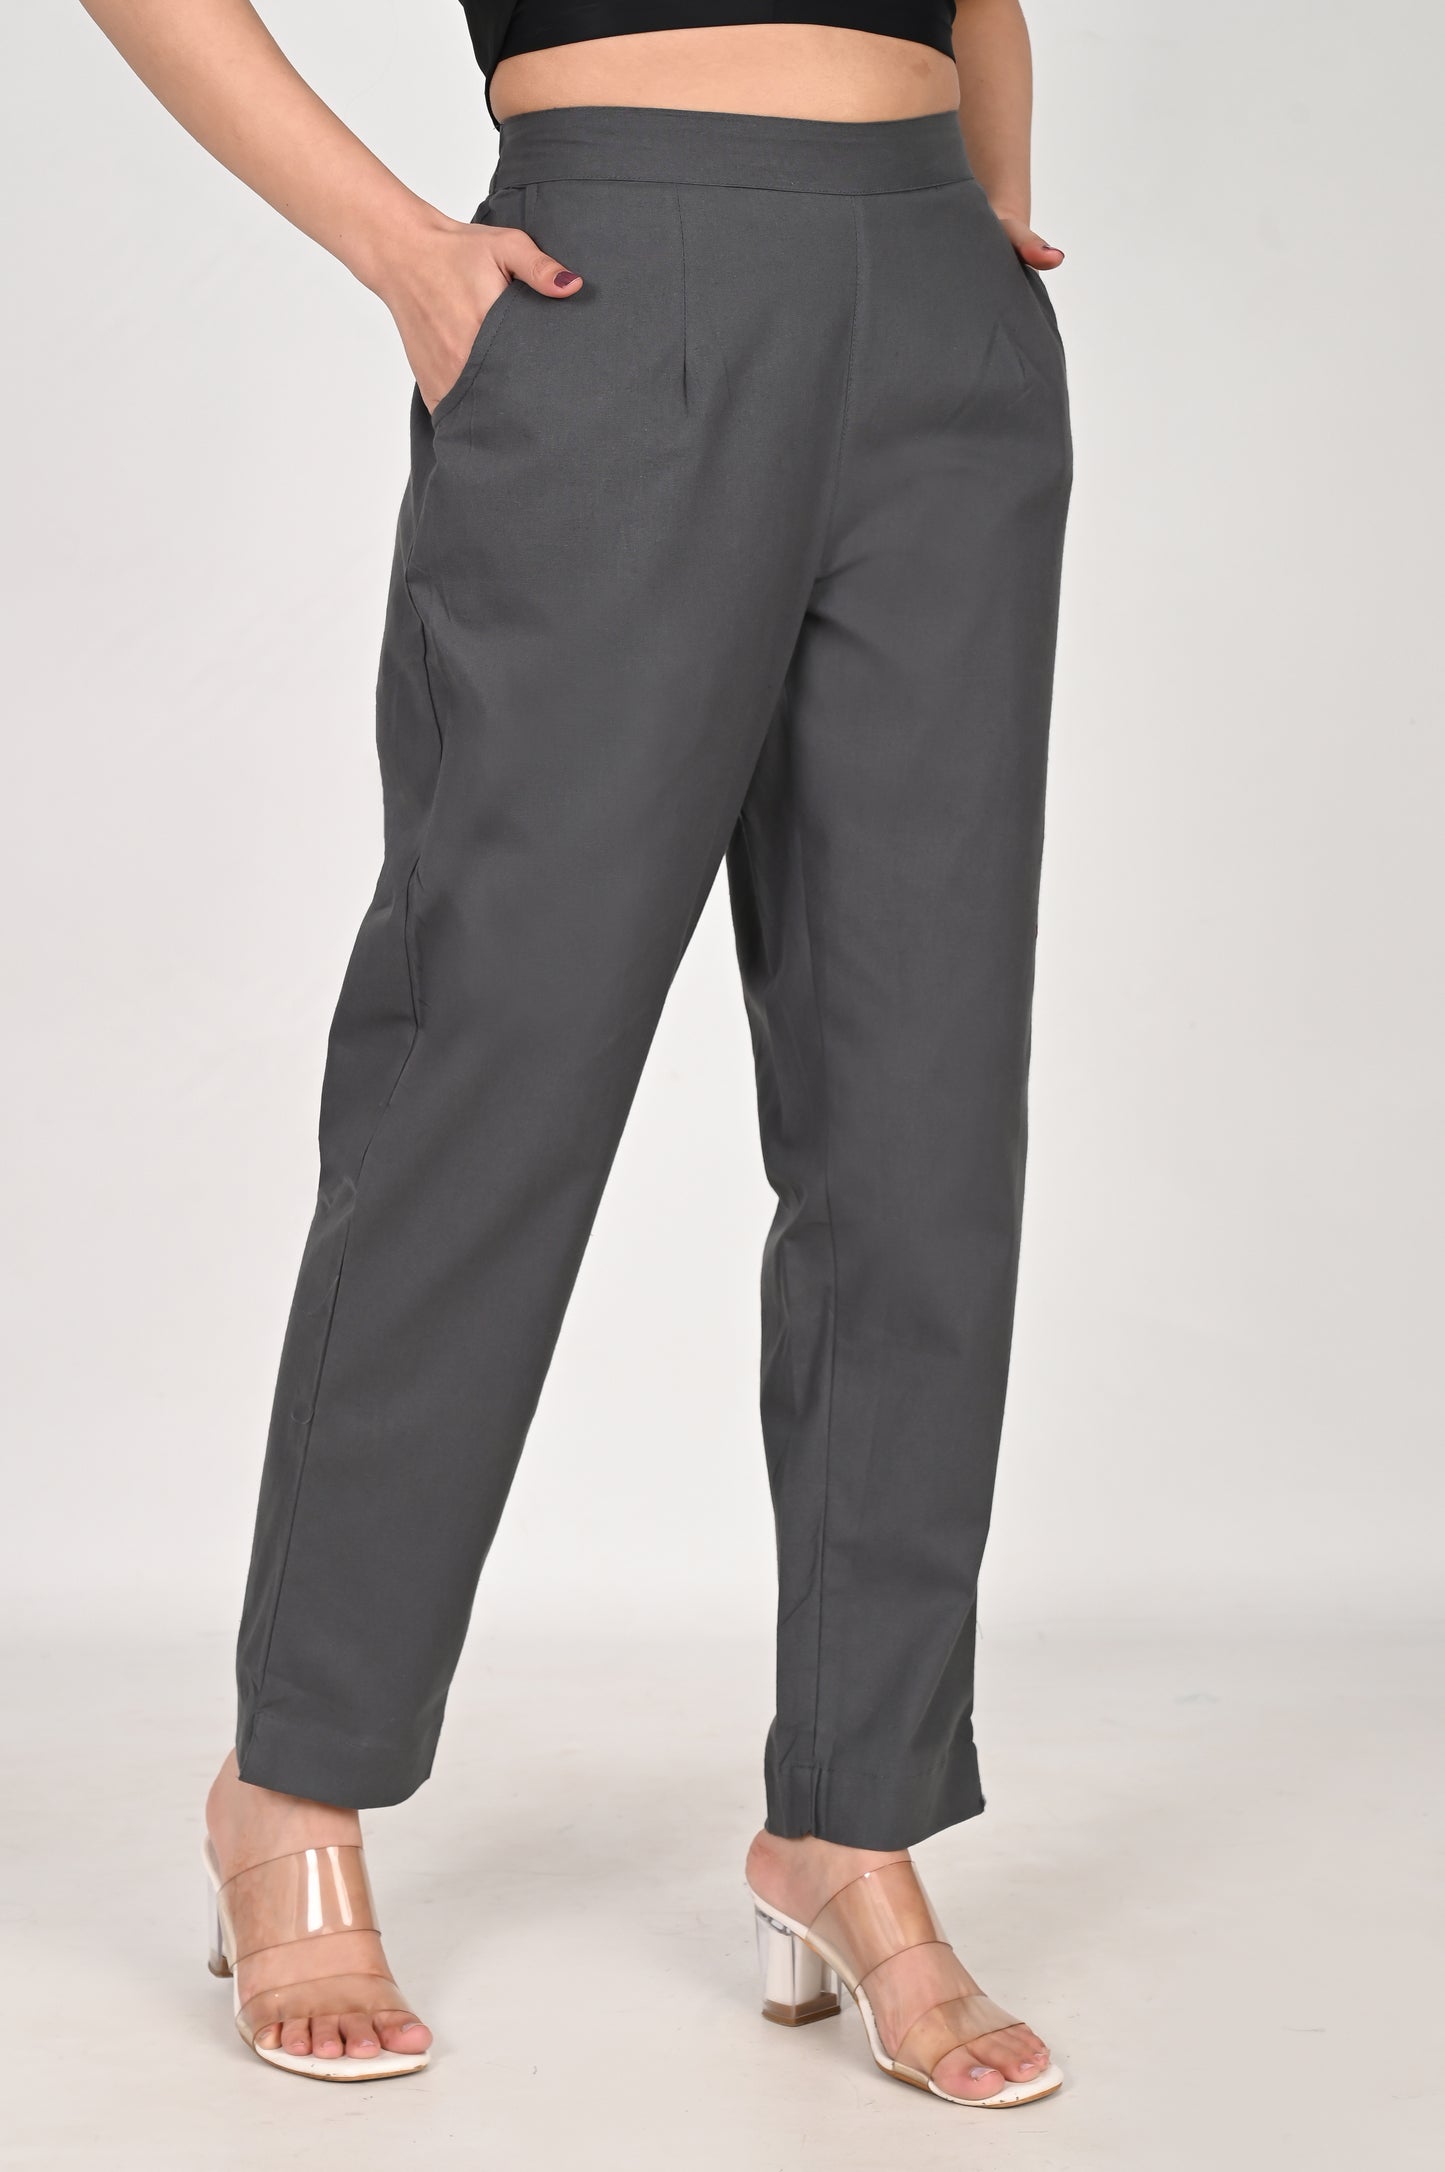 Cement Grey Everyday Cotton Pant